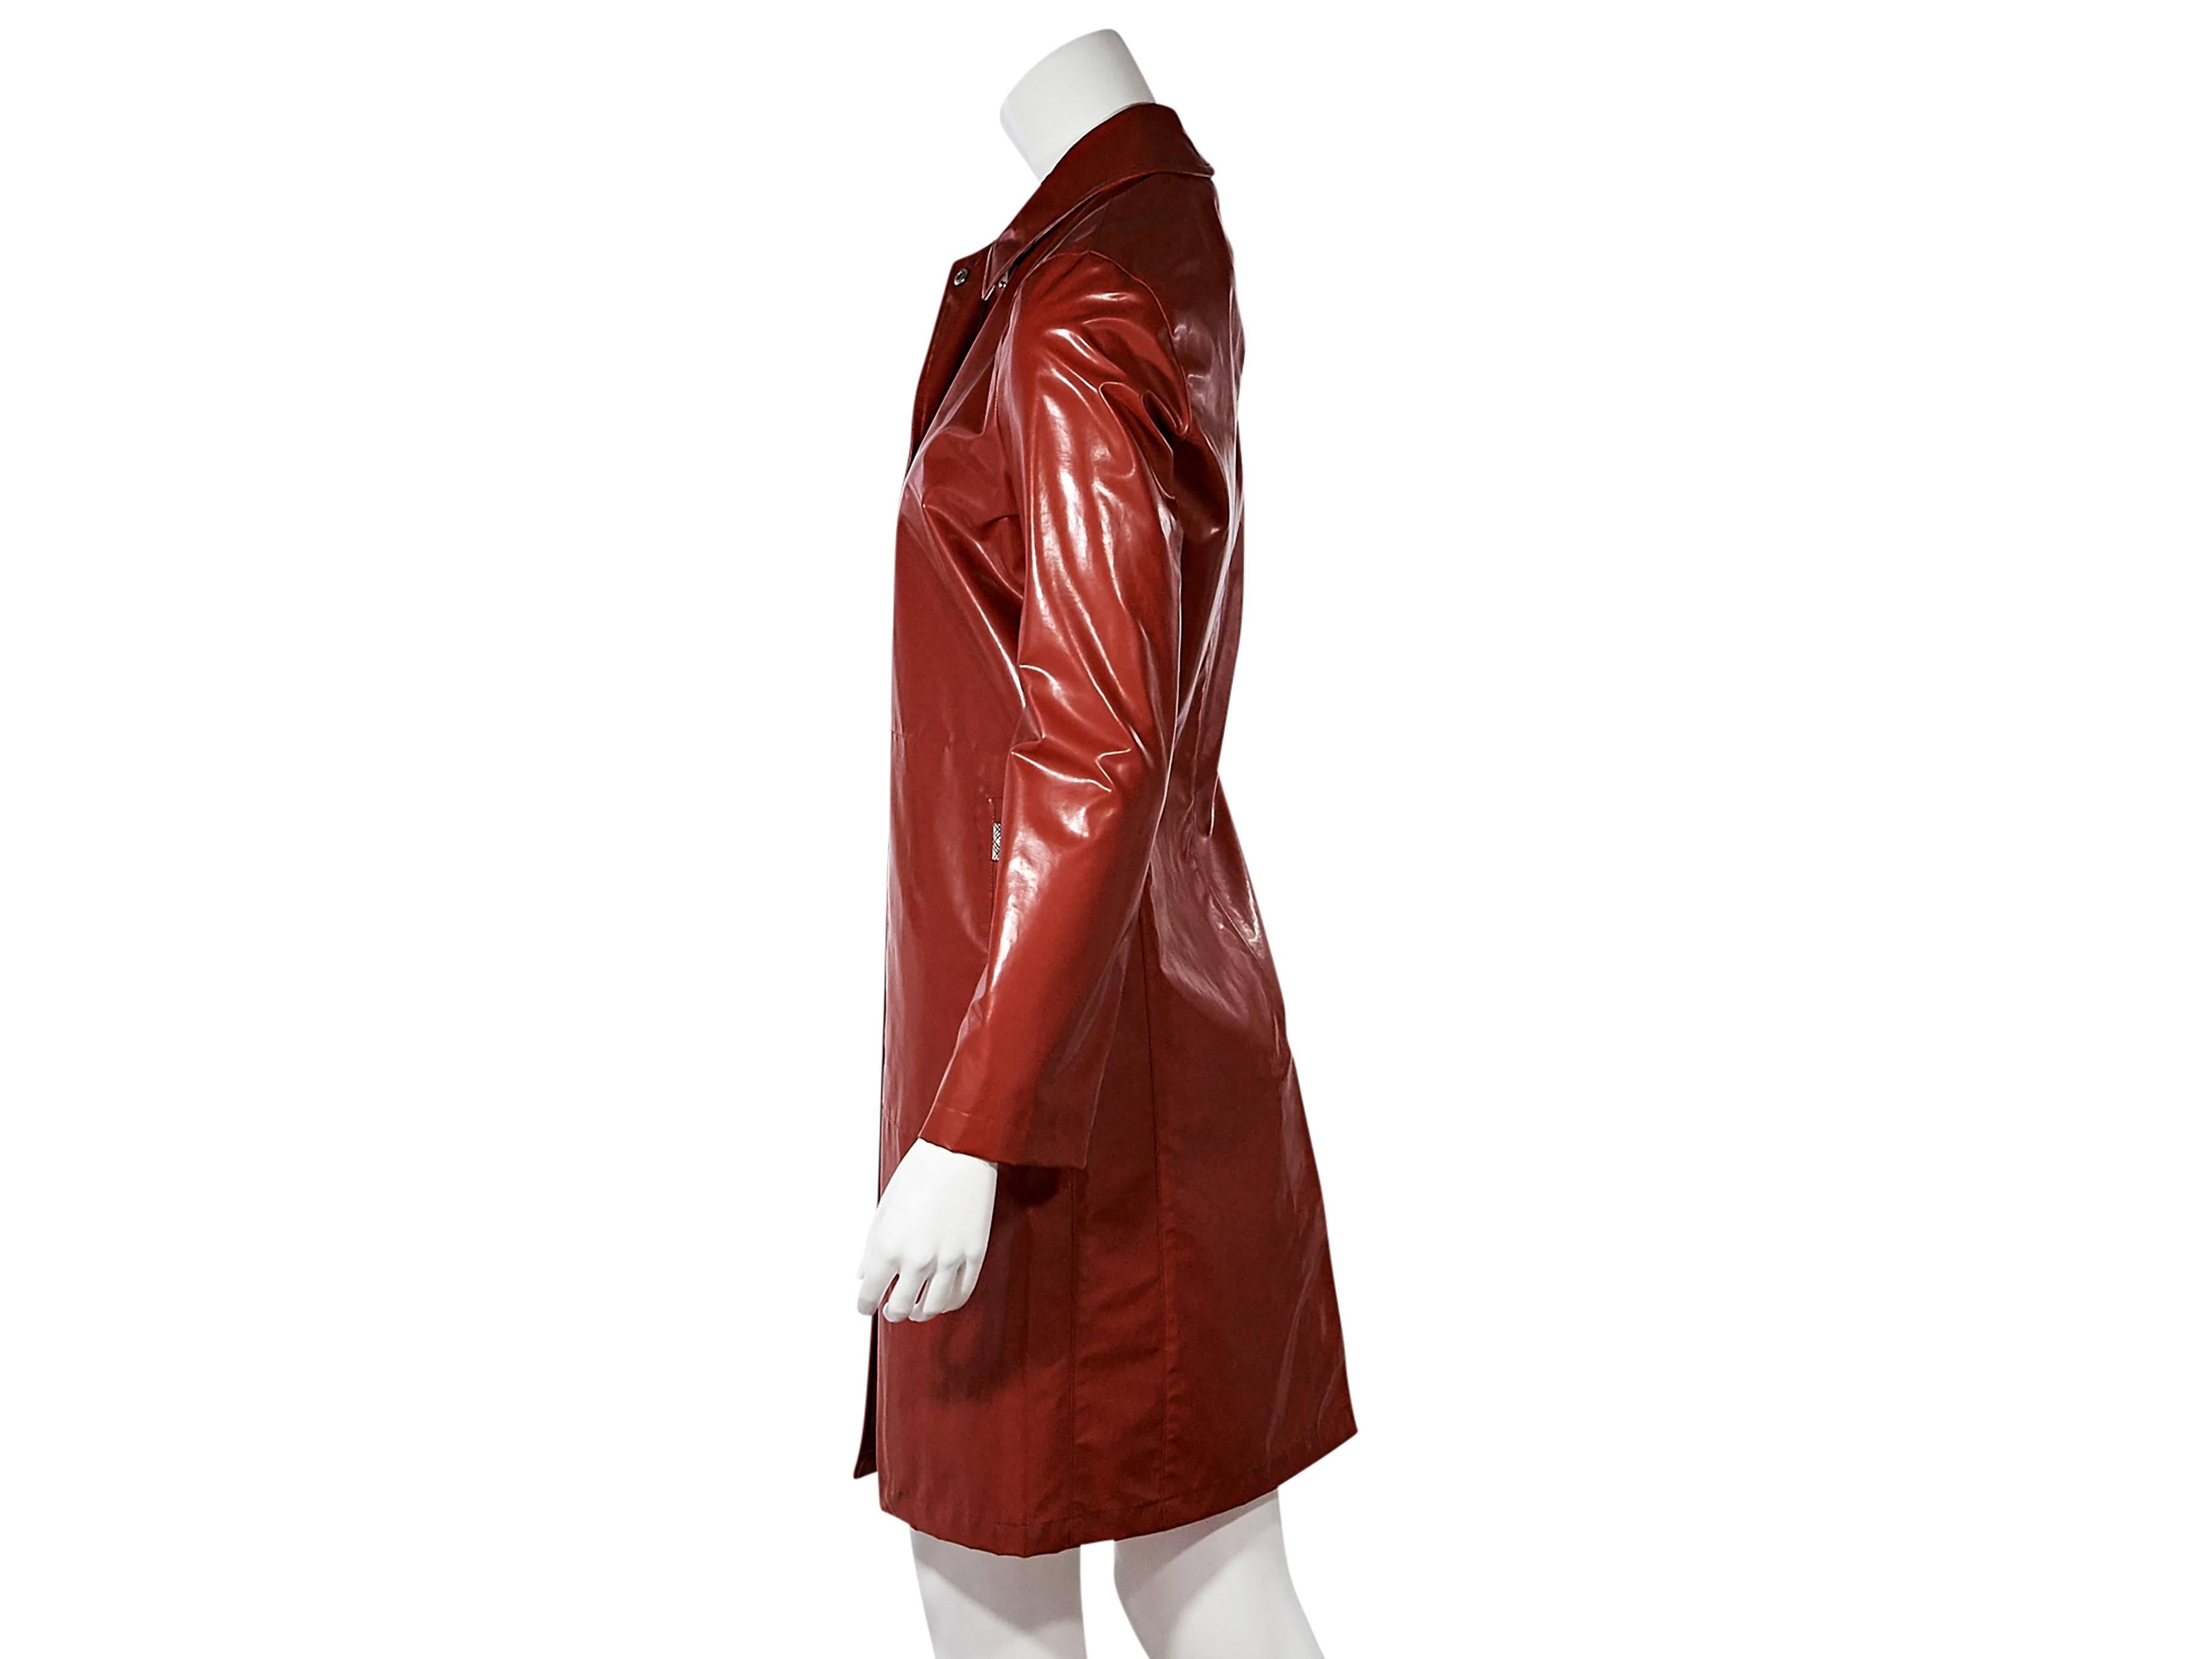 Product details:  Red coated raincoat by Burberry.  Spread collar.  Long sleeves.  Snap-front closure.  Side slide pockets.  Back center hem vent.  
Condition: New with tags. 
Est. Retail $ 730.00